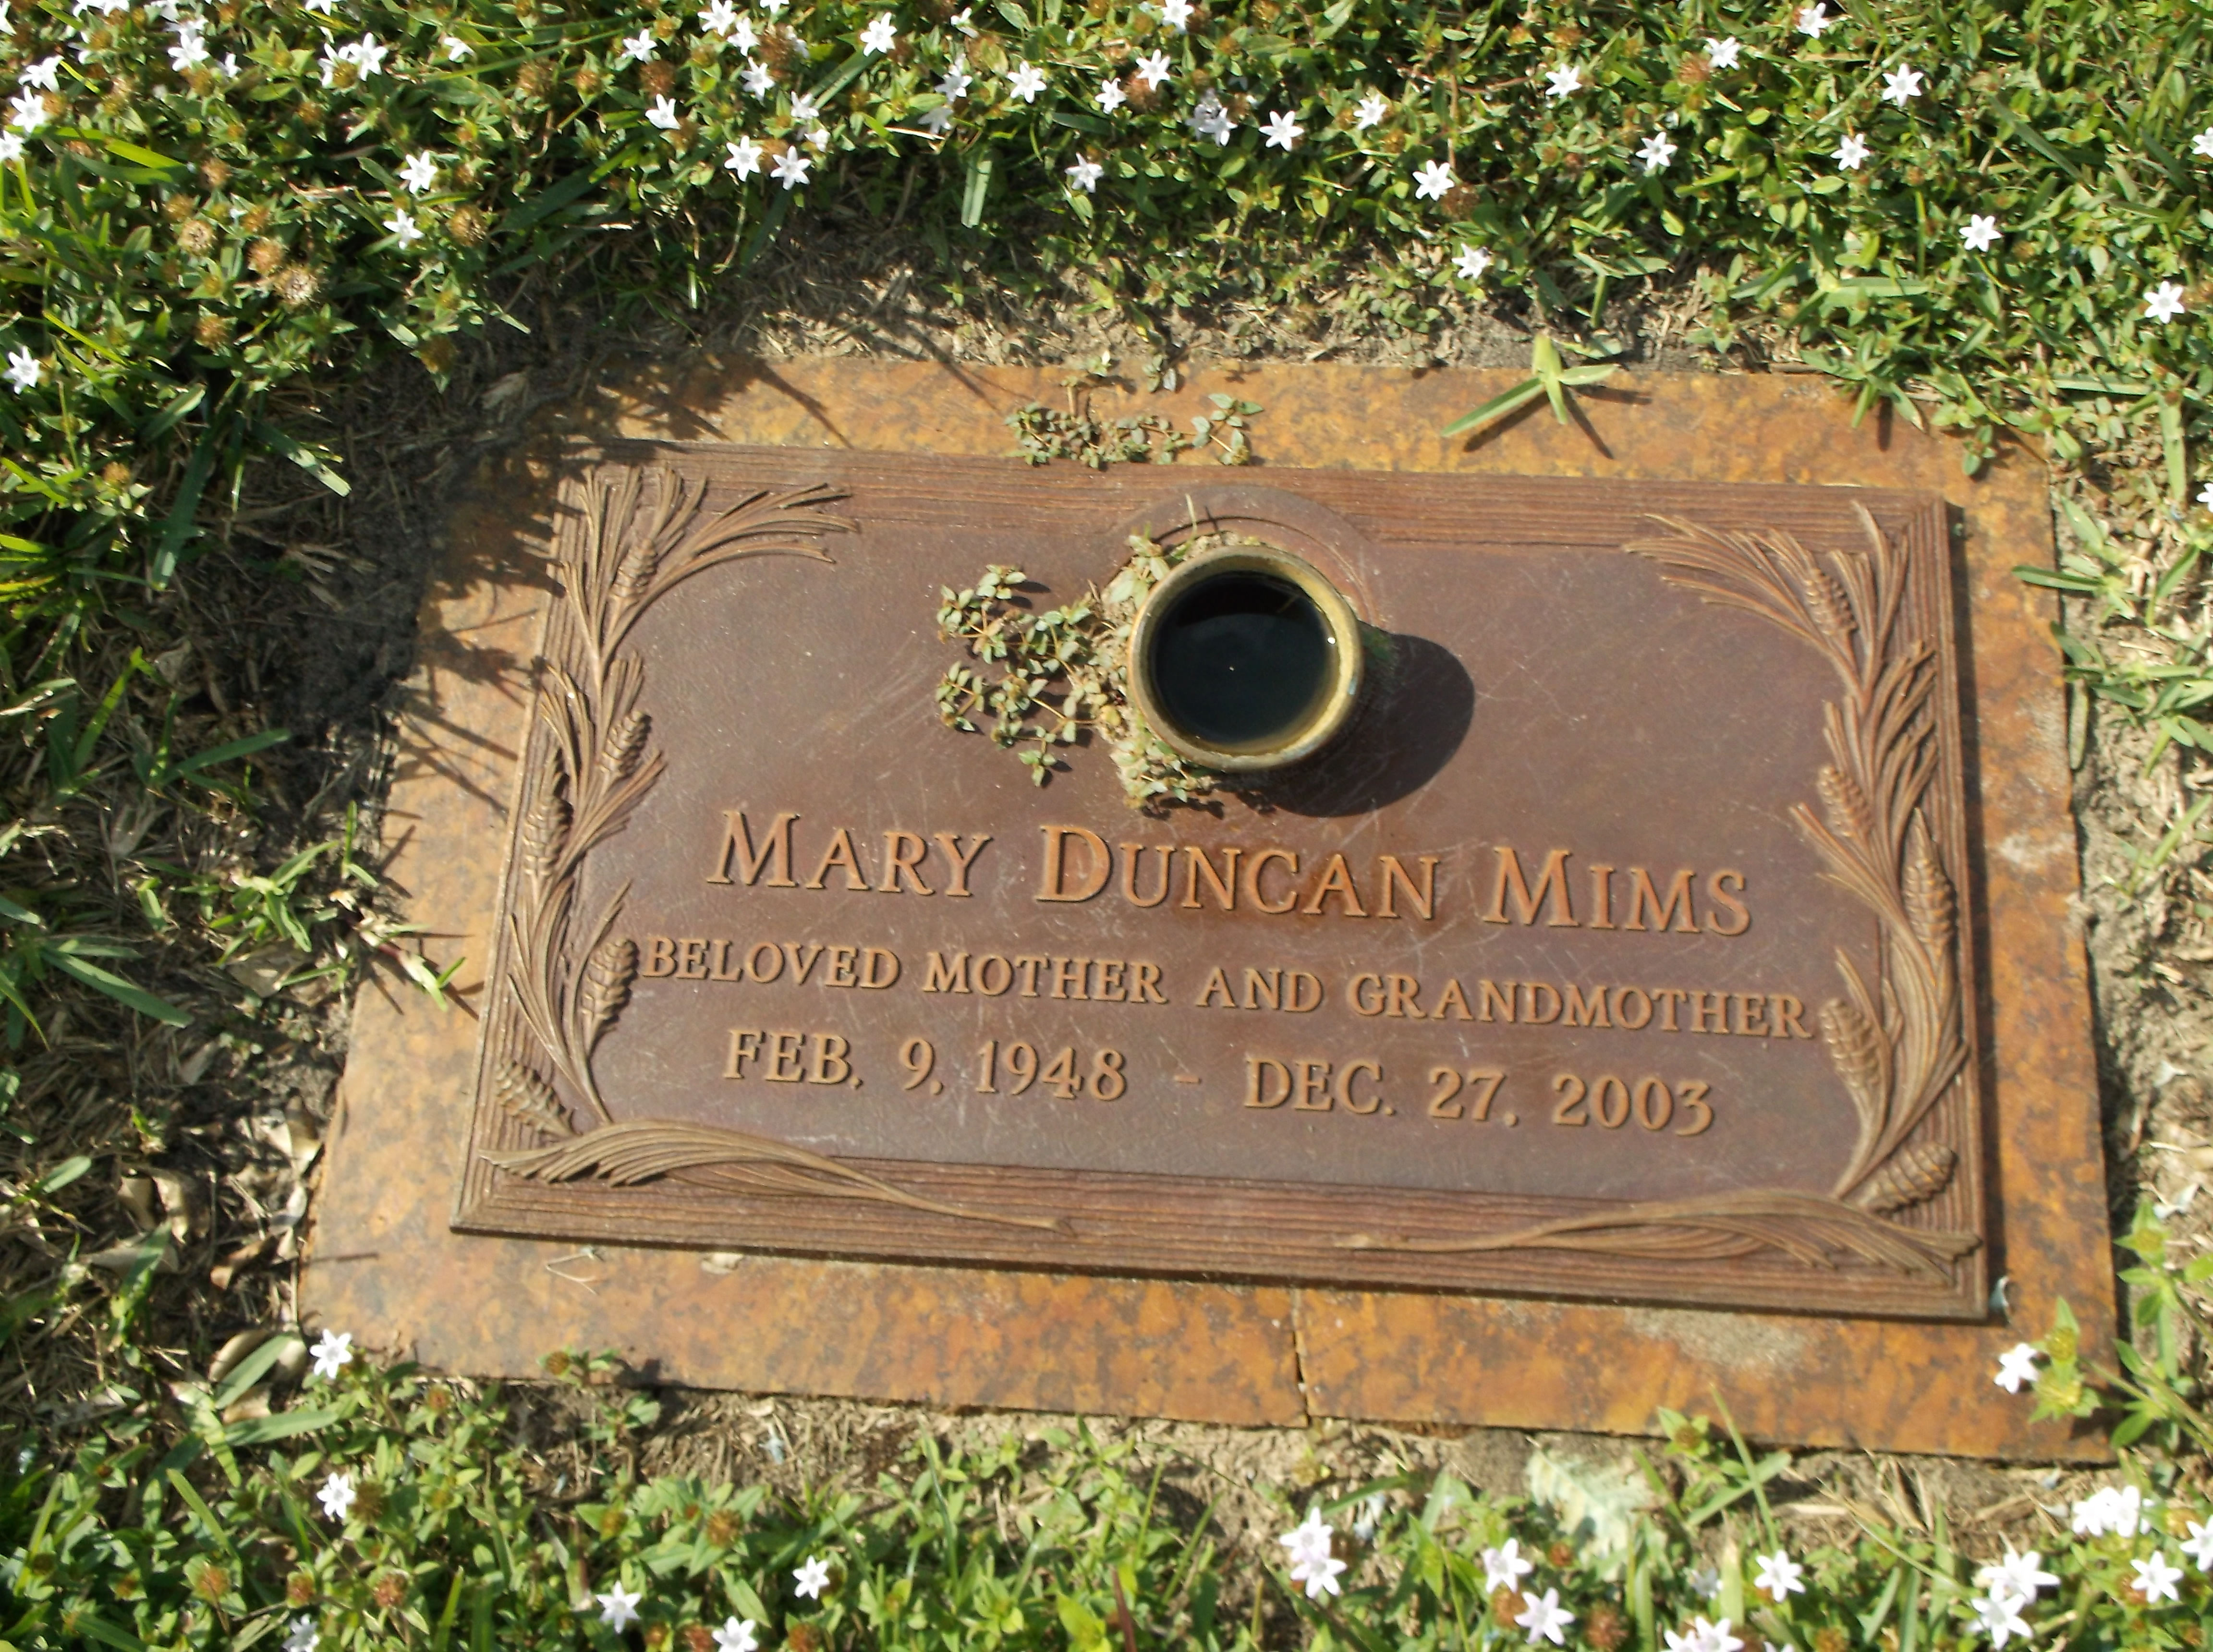 Mary Duncan Mims